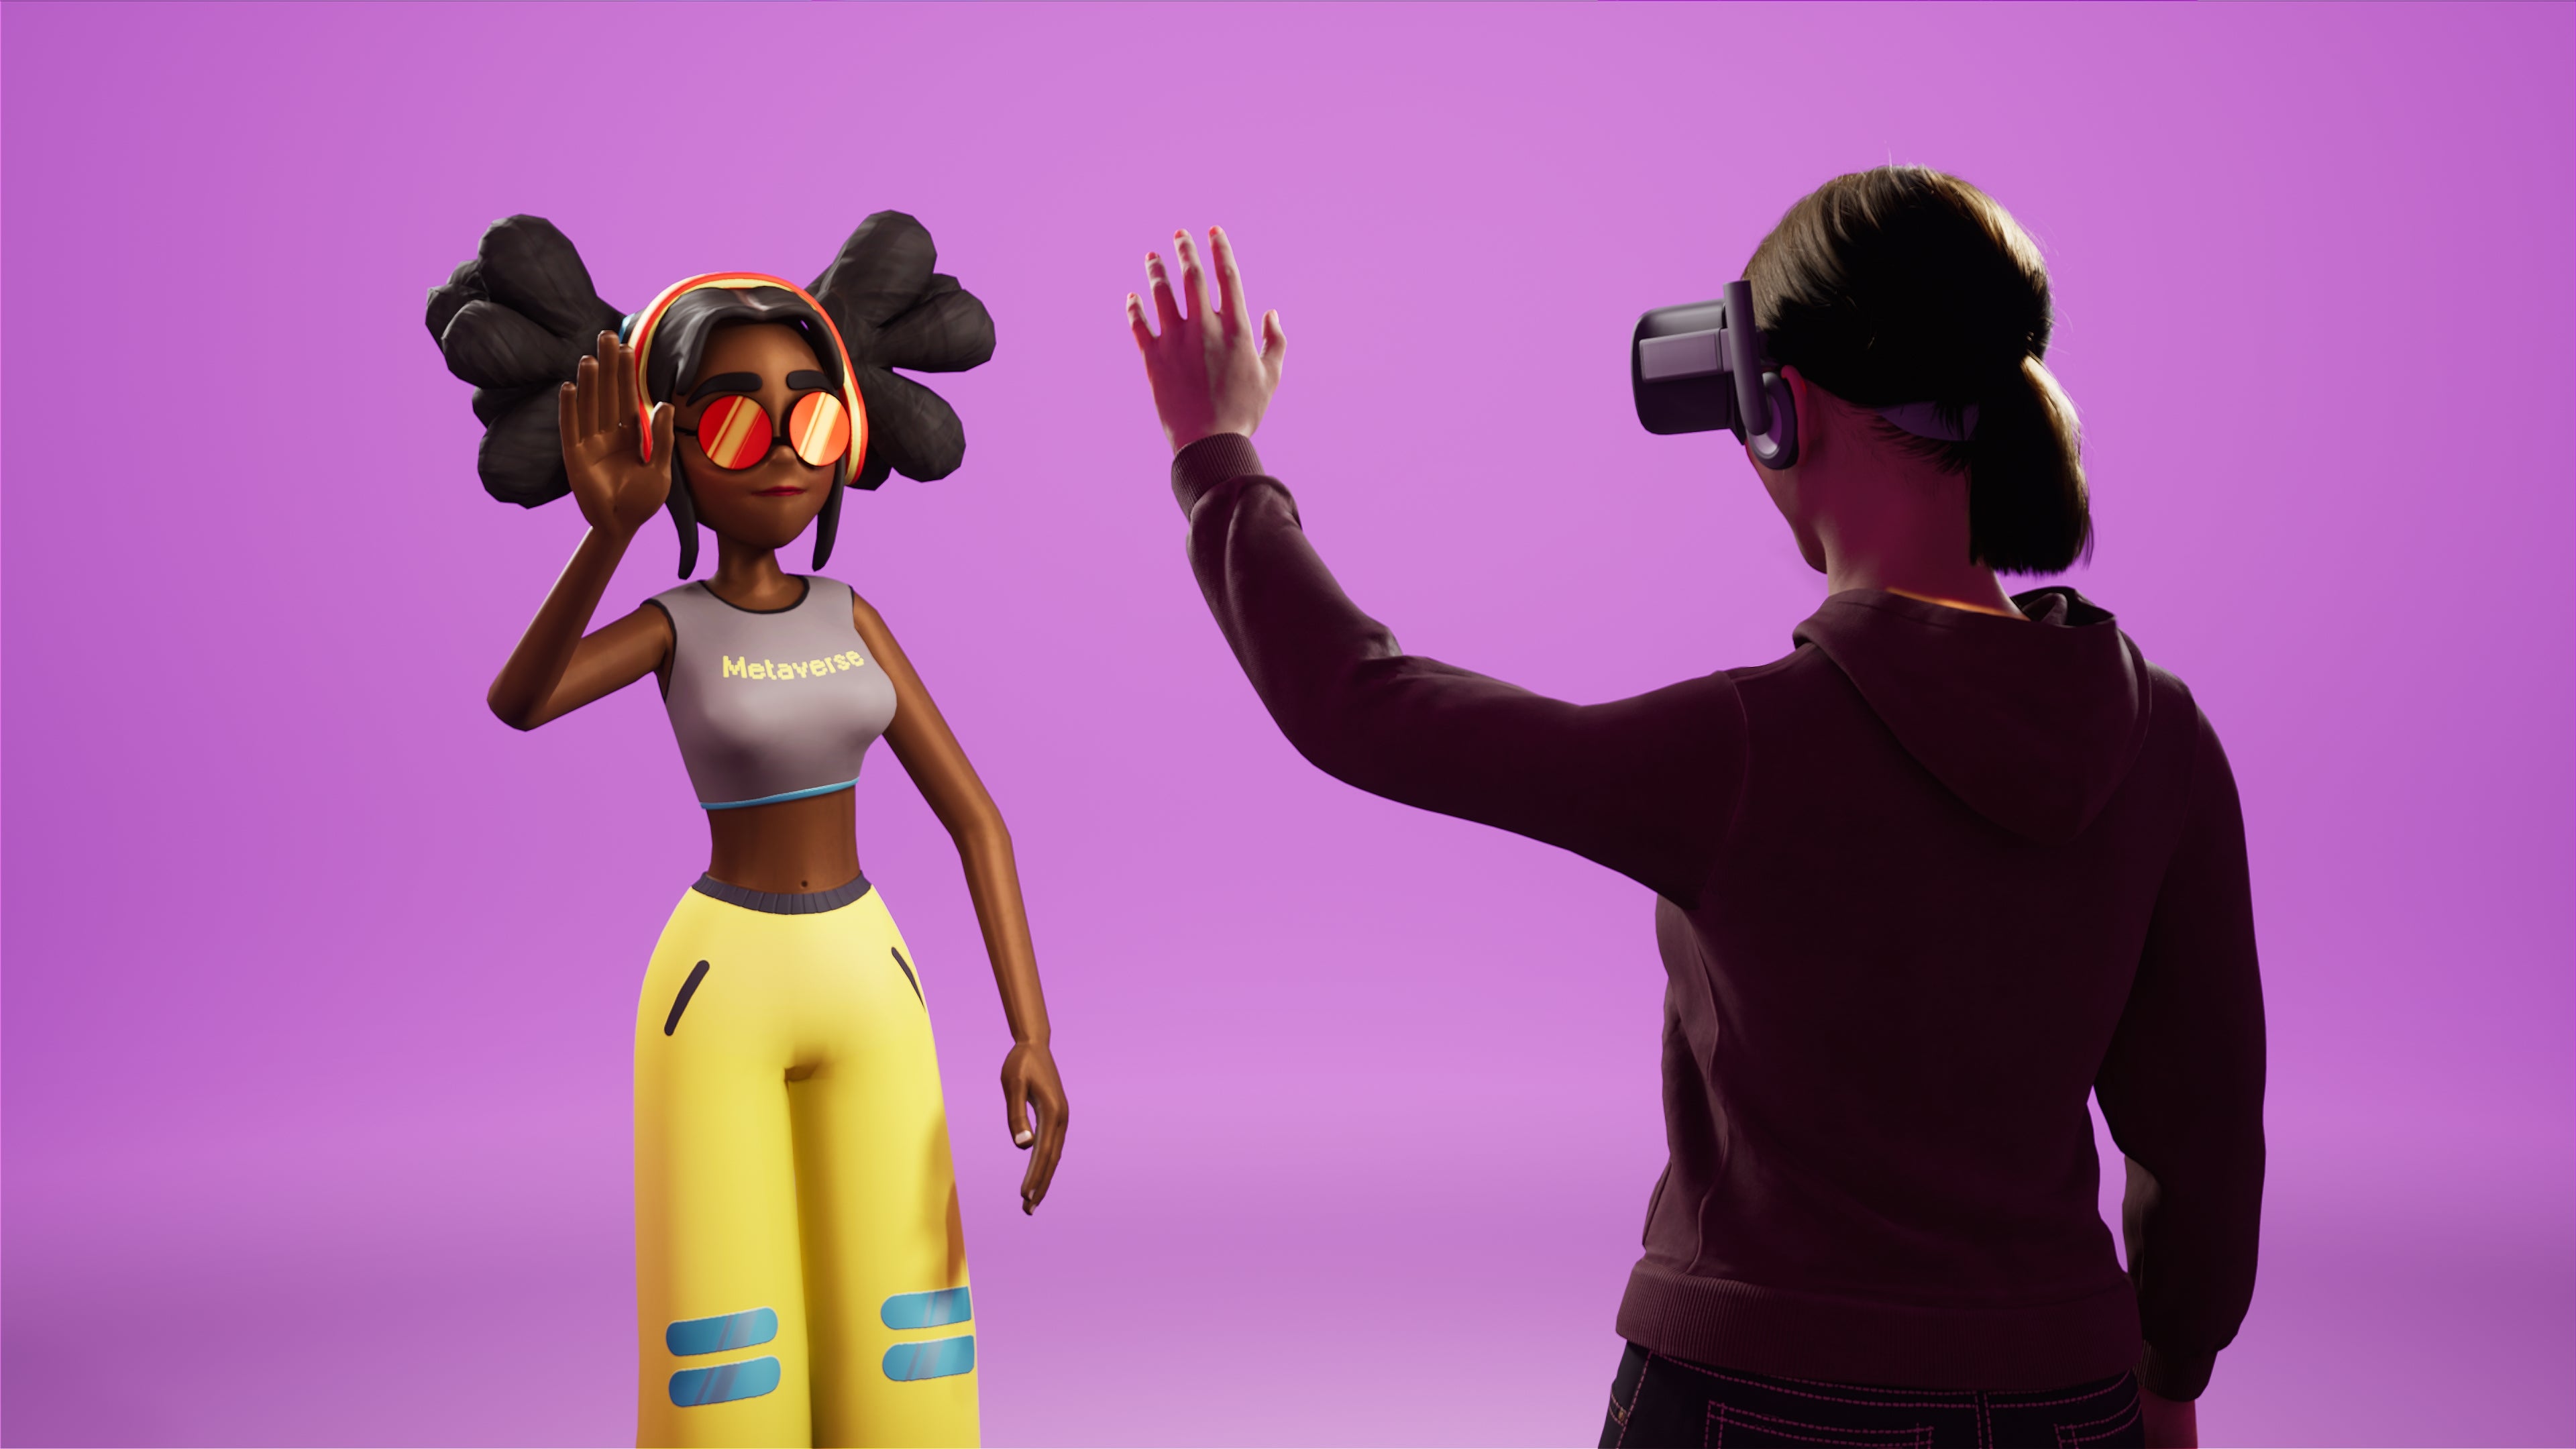 intended to show how some individuals avatars look different than they do -- an illustration of person, black skin, with virtual reality glasses on, wearing a hoodie, hair tied back, facing her avatar, which is wearing work0ut clothes, tight pants, tight cropped shirt, sunglases, fluffy pigtails